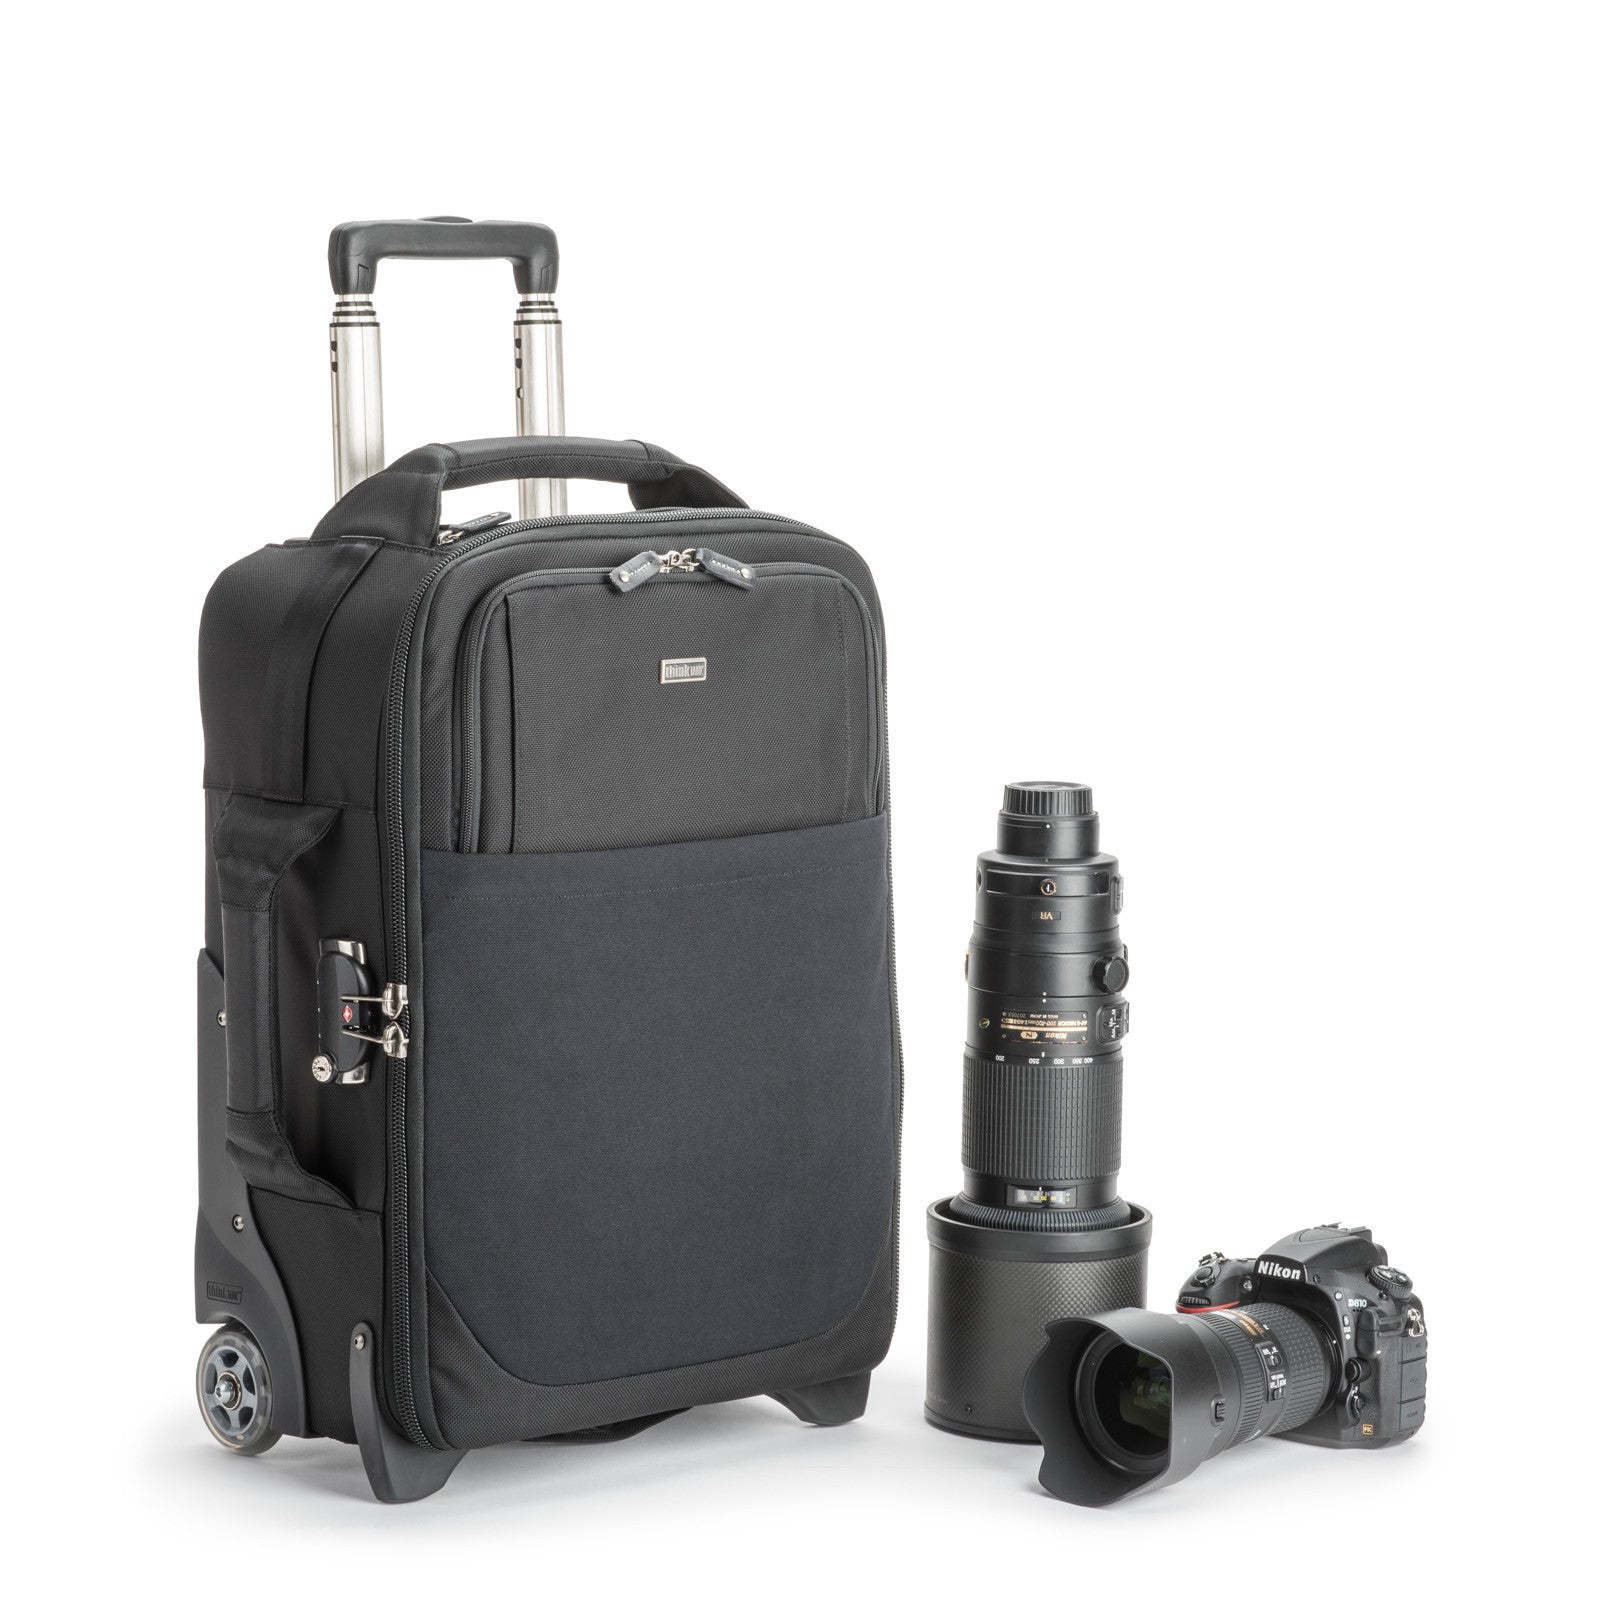 Think Tank Airport International V3.0 Rolling Camera Bag, bags roller bags, Think Tank Photo - Pictureline  - 2